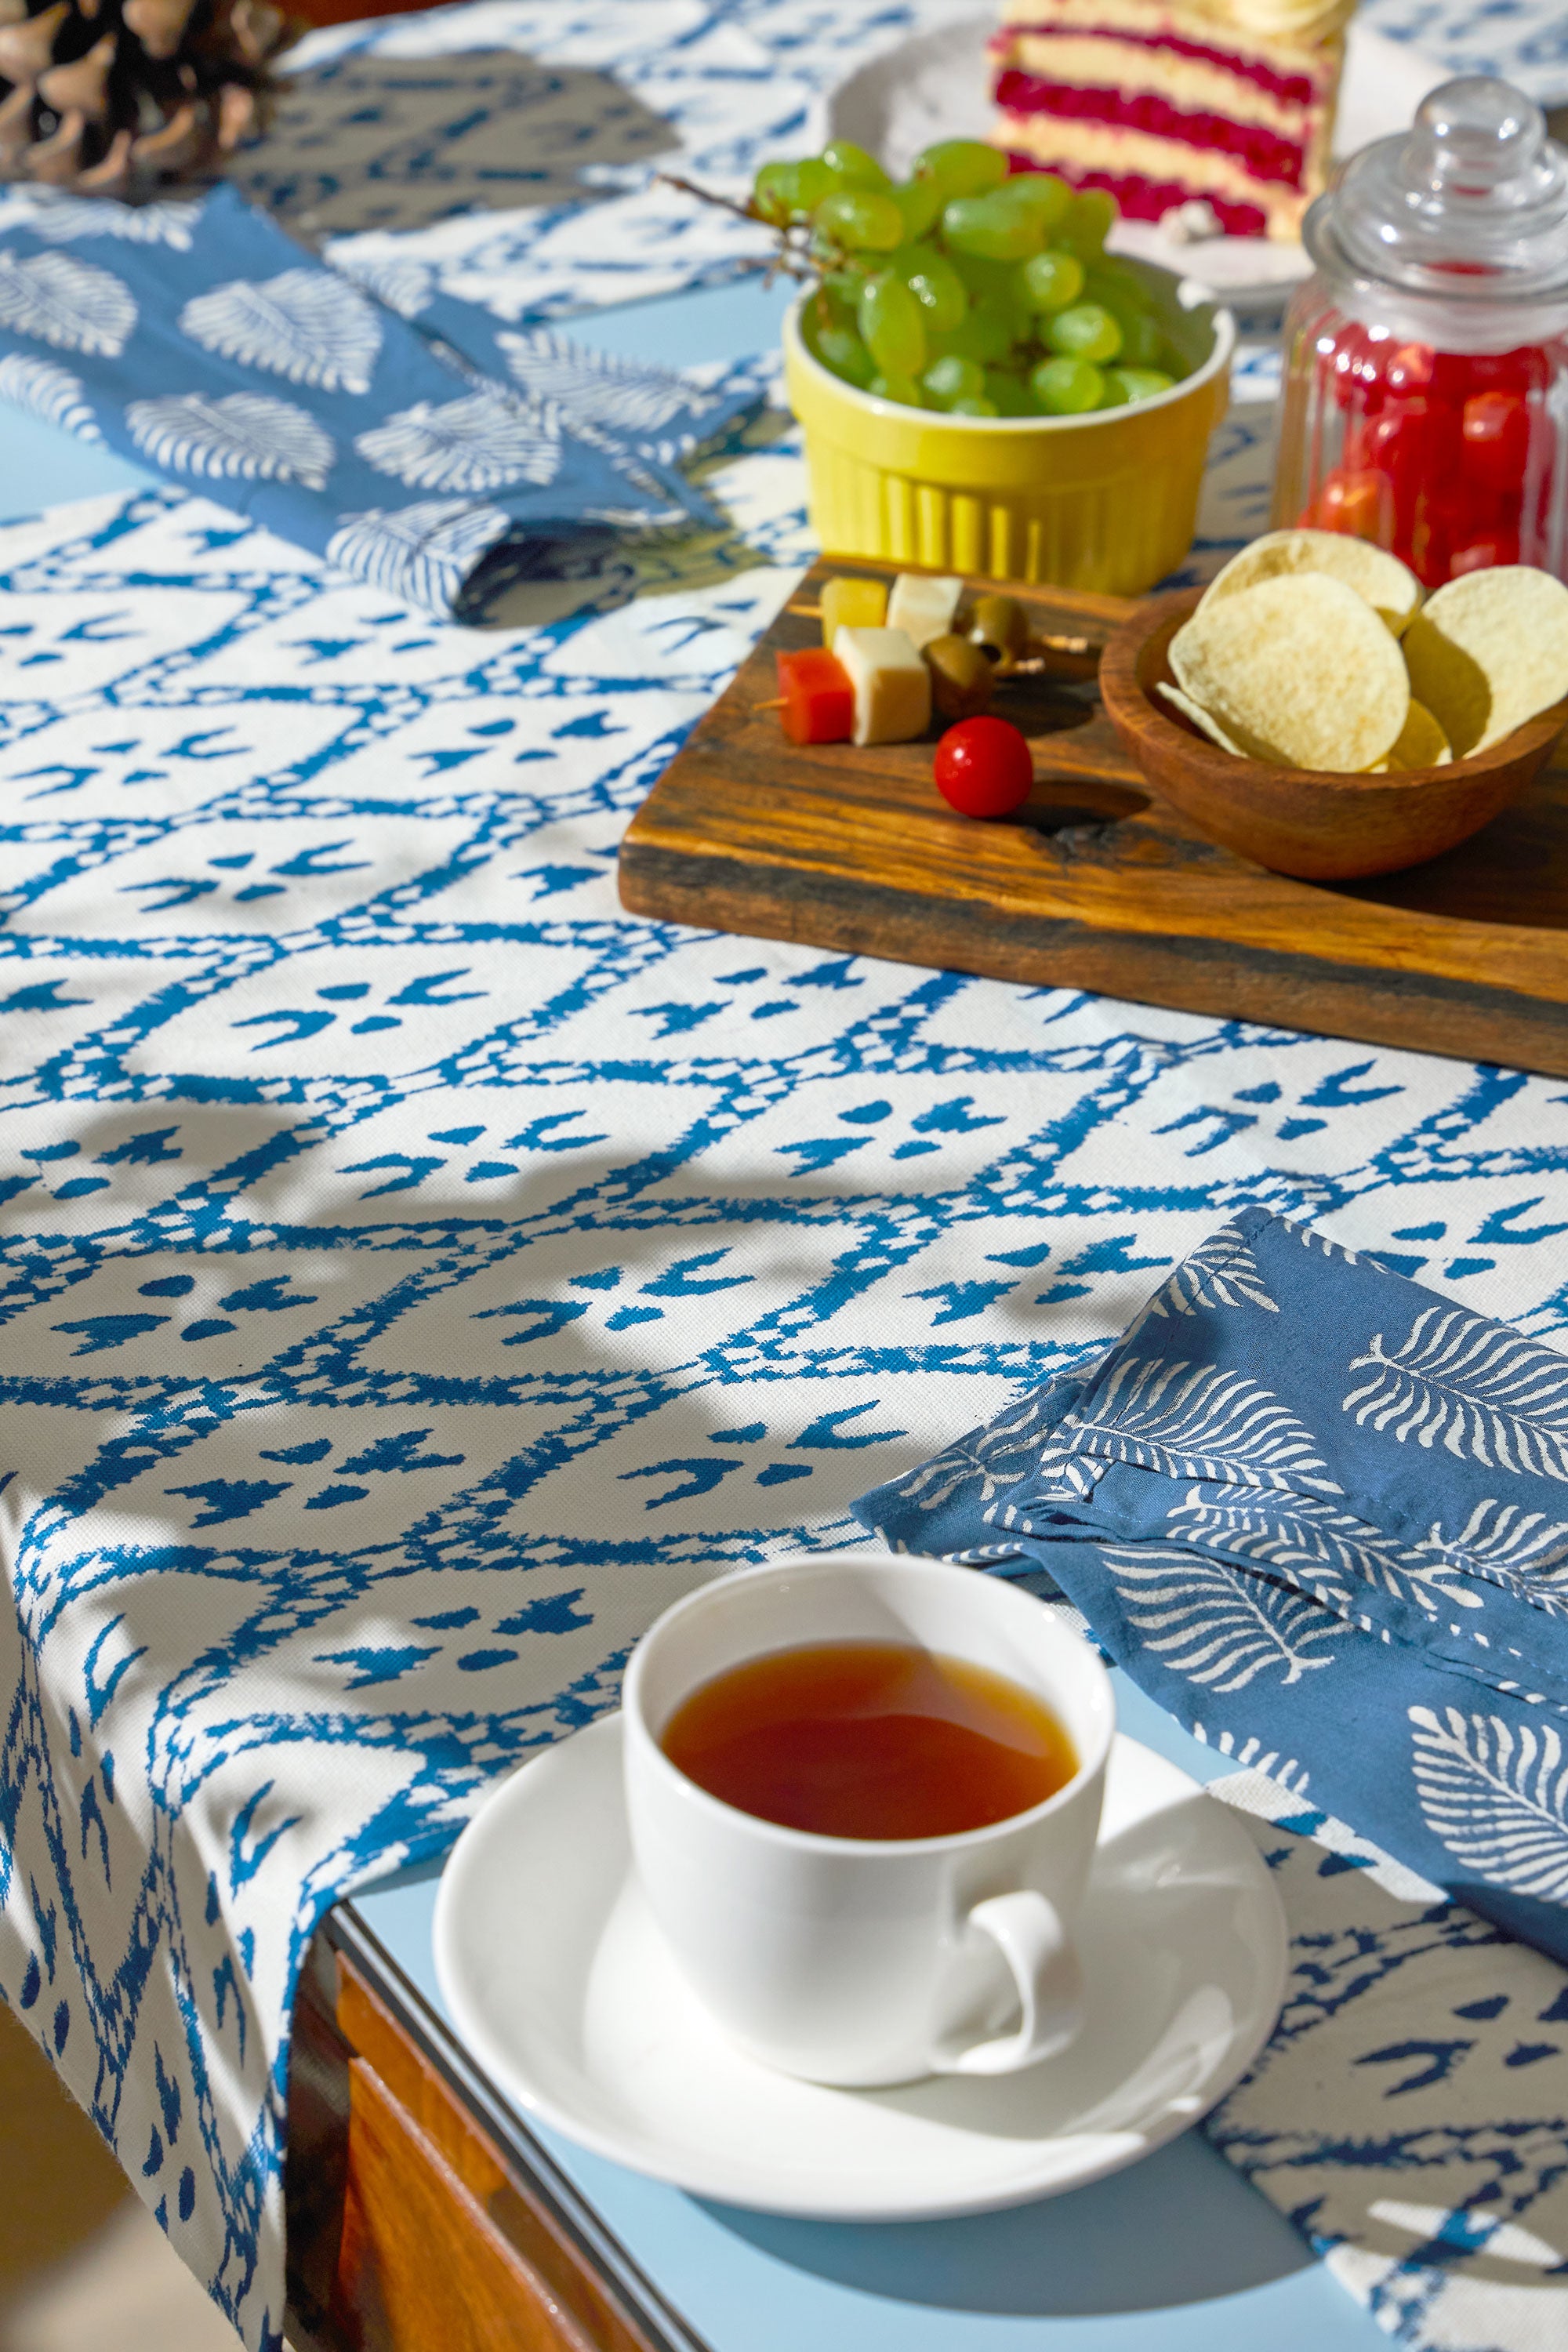 placemats for dining table with runner